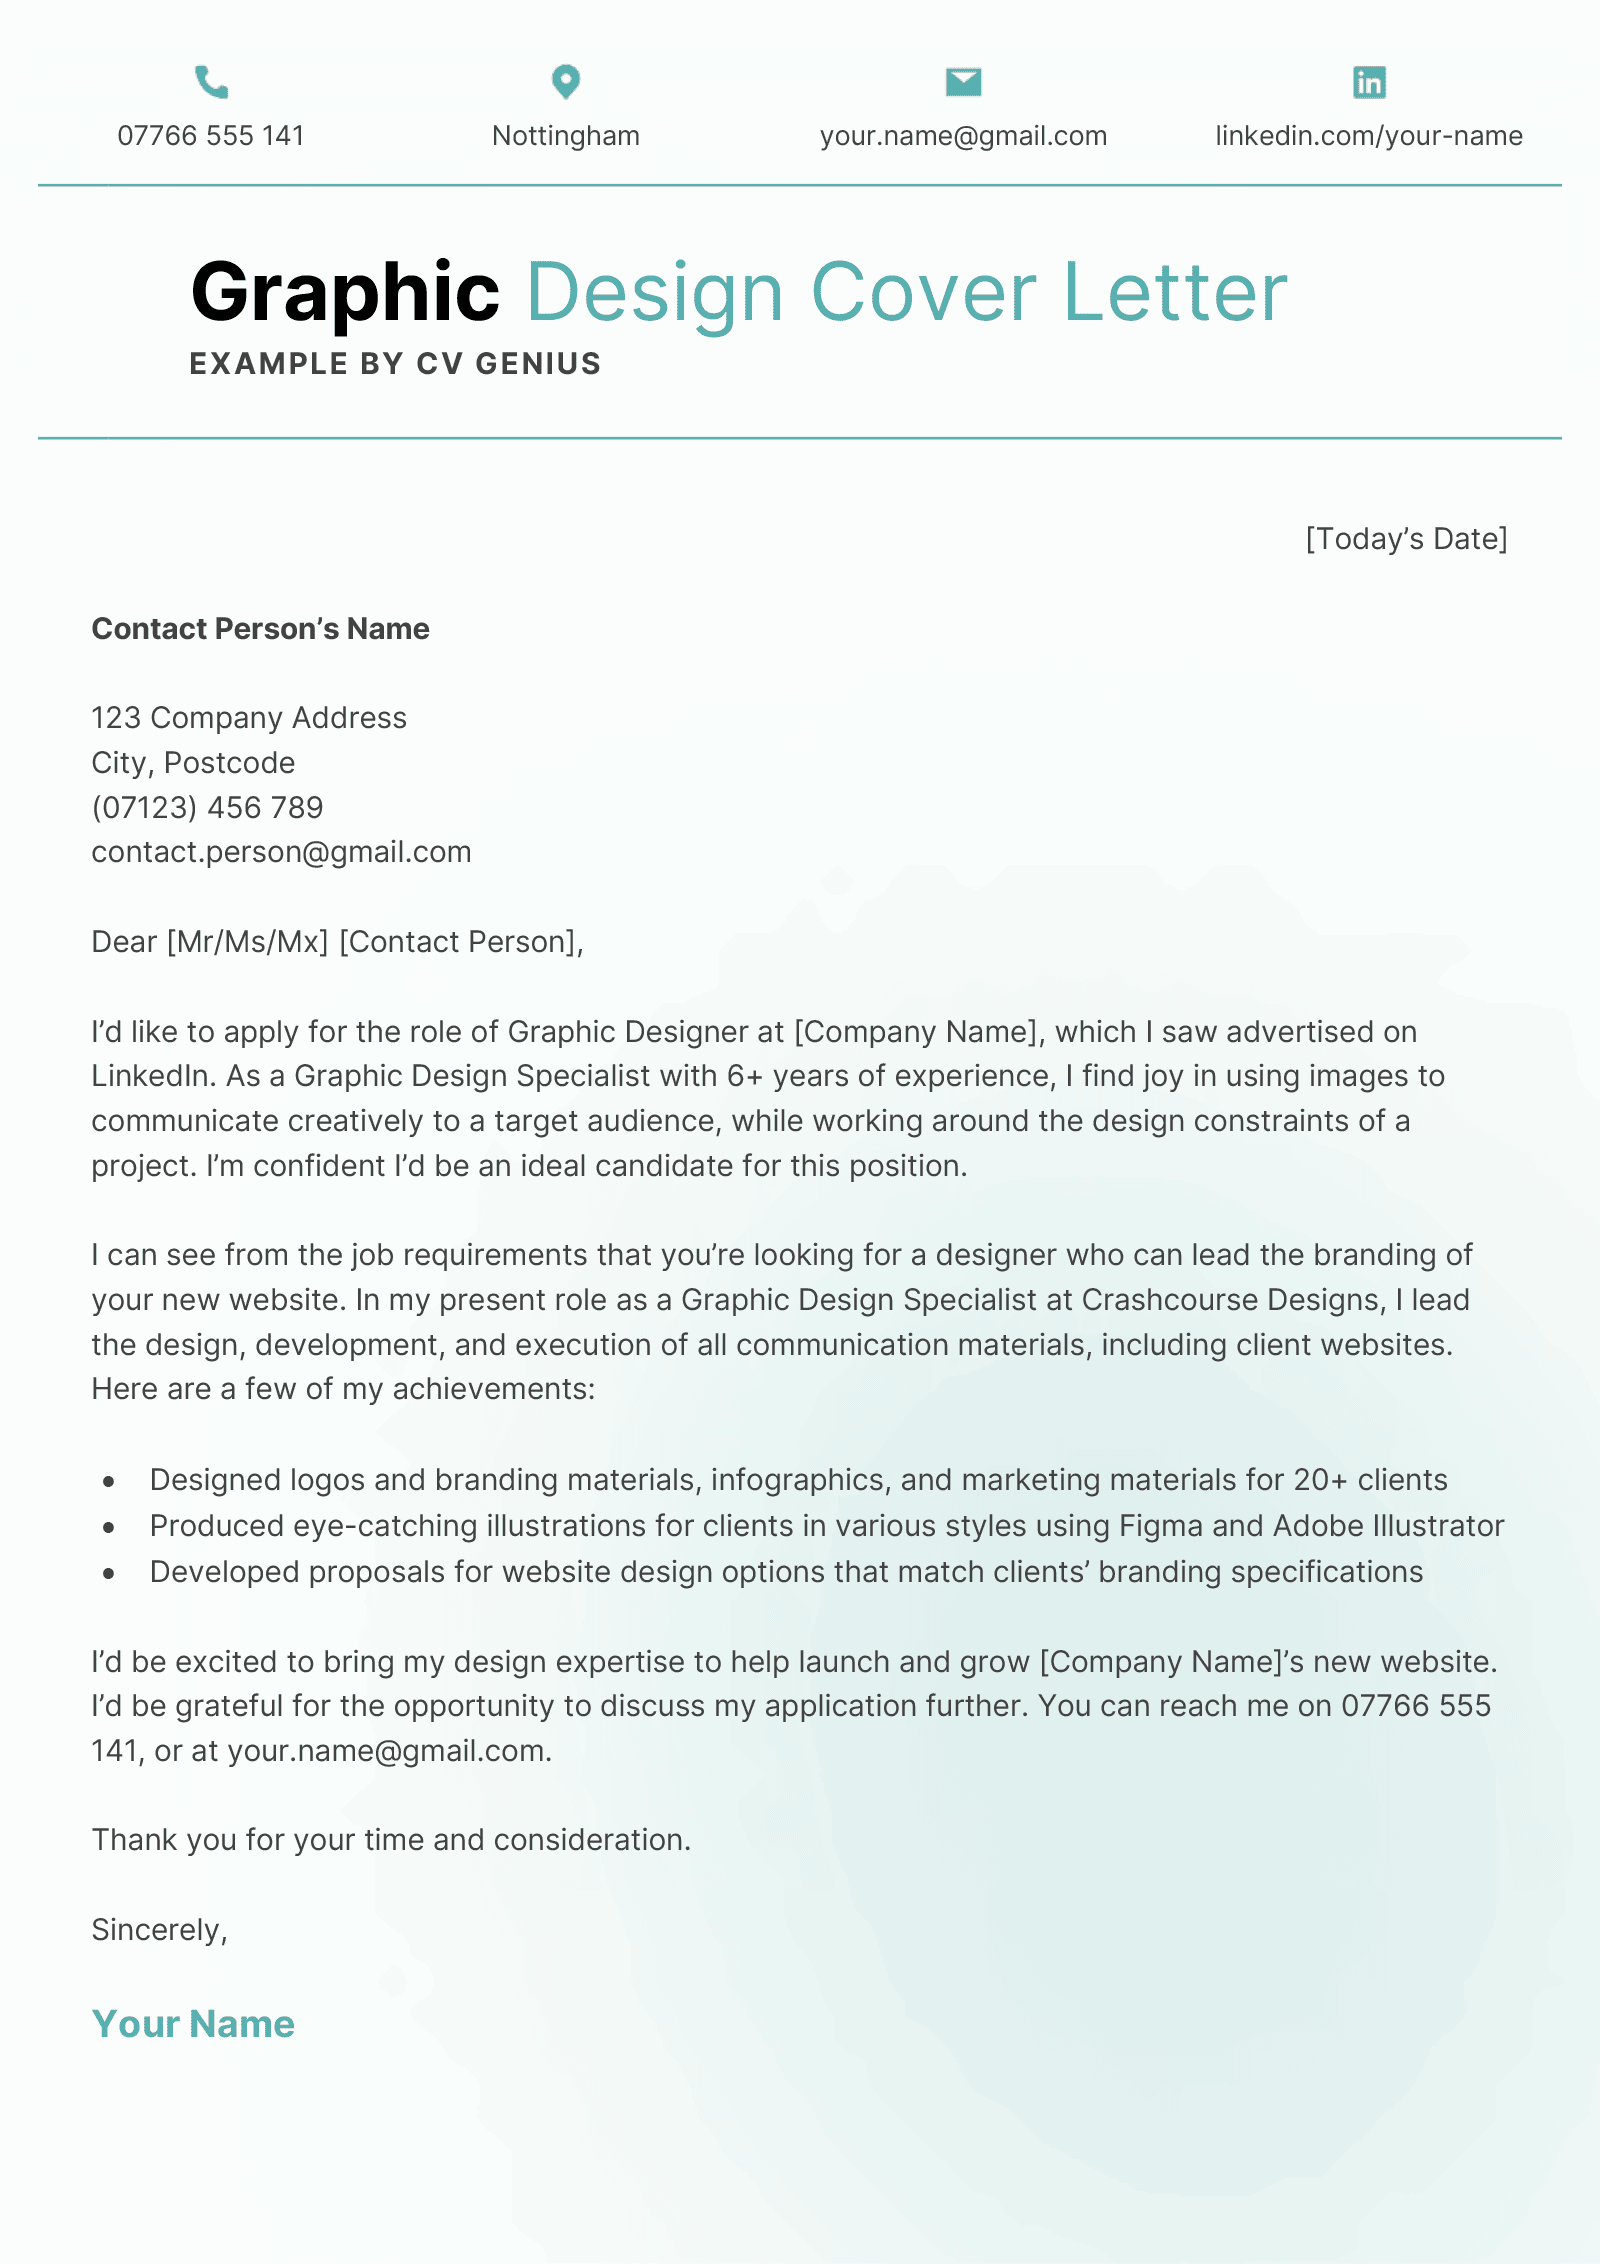 cover letter for graphic designer role